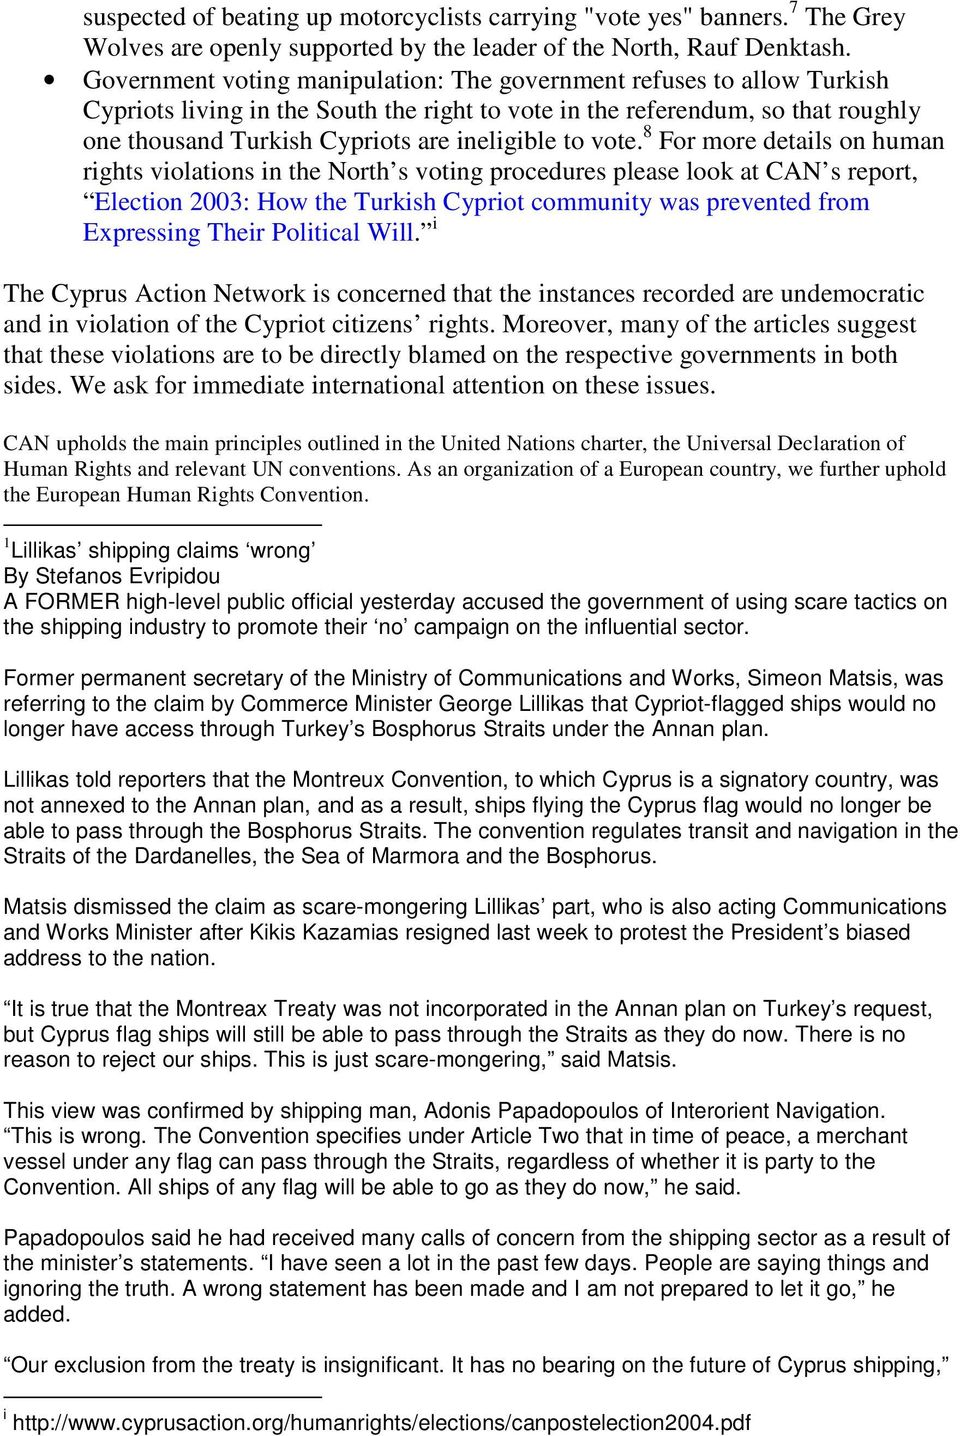 violations in the North s voting procedures please look at CAN s report, Election 2003: How the Turkish Cypriot community was prevented from Expressing Their Political Will i The Cyprus Action